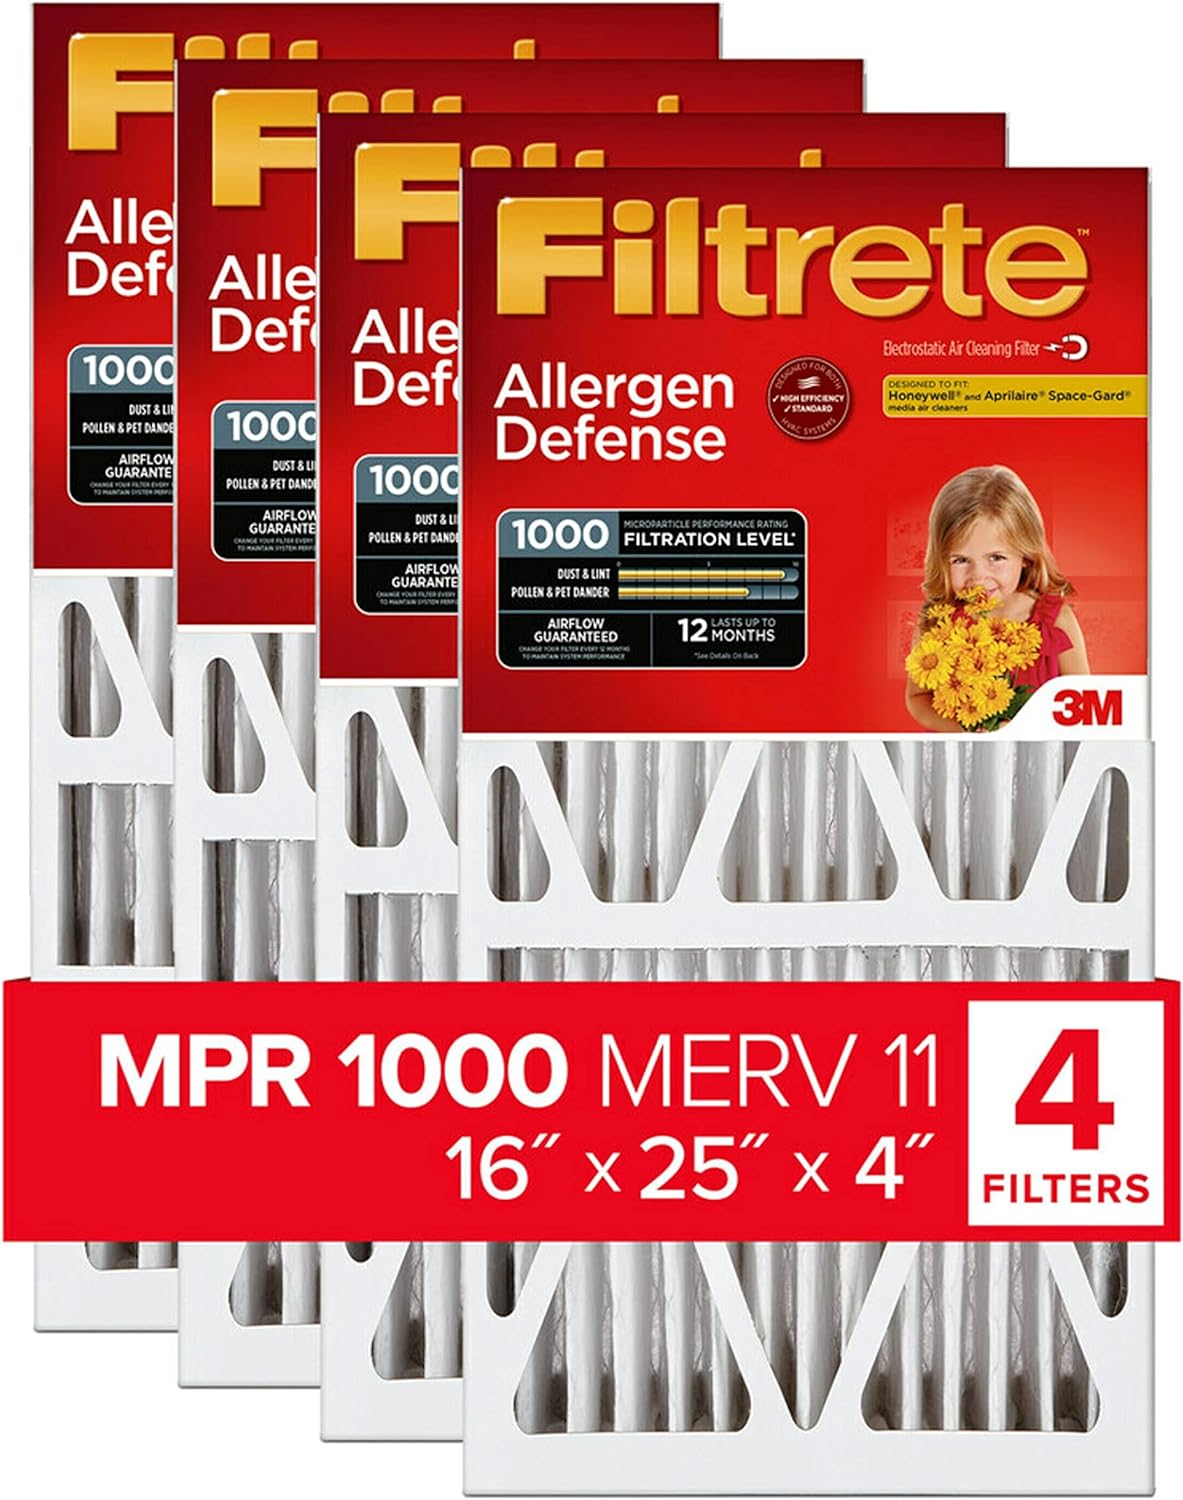 These work really well as a replacement for my 4 Honeywell furnace filter. They filter a lot and the MERV rating shows that. While the packaging says that it can last up to 12 months, they seem to trap quite a bit of dust and I usually exchange at my a/c and furnace tuneups every 6 months. Despite the high MERV rating, they dont seem to have any issues with restricting airflow. I have used other brands and these seem to flow the best and keep the air fresh. We use an air purifier, and while no